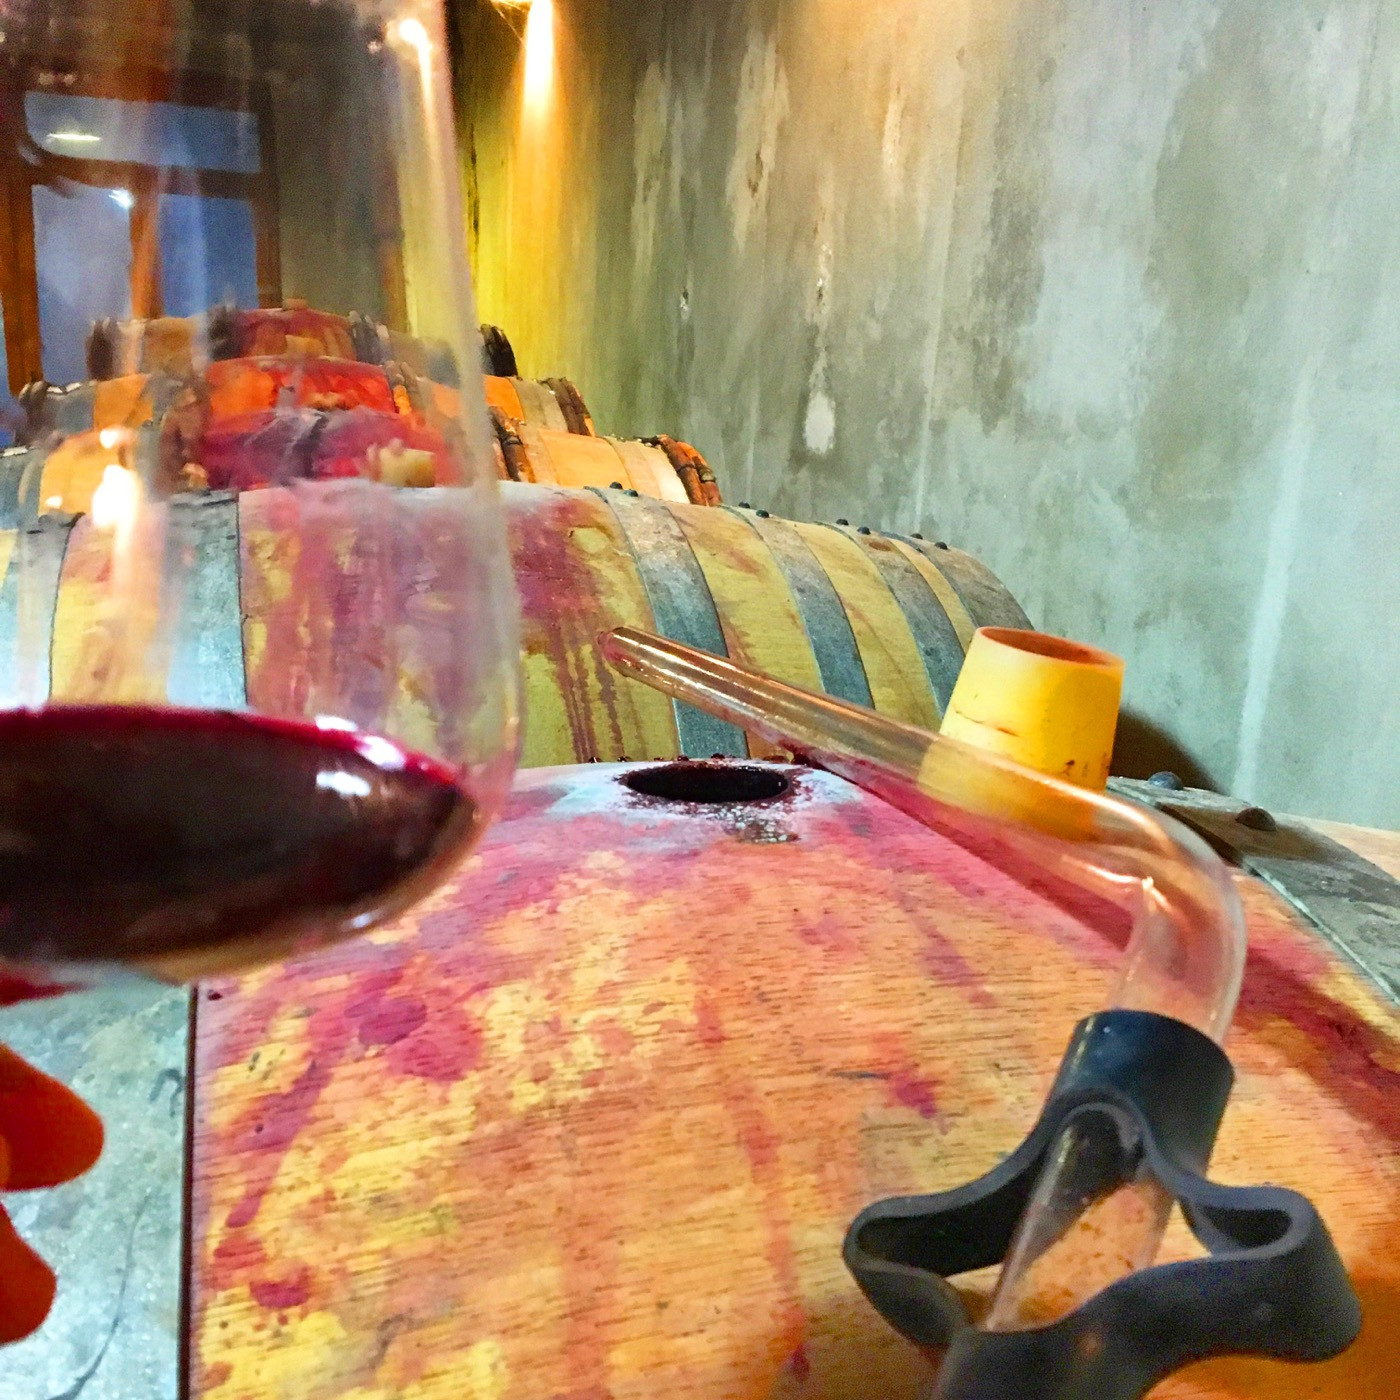 While making our proper wine of the Domain: Hocus Pocus. We love wine making and testing.